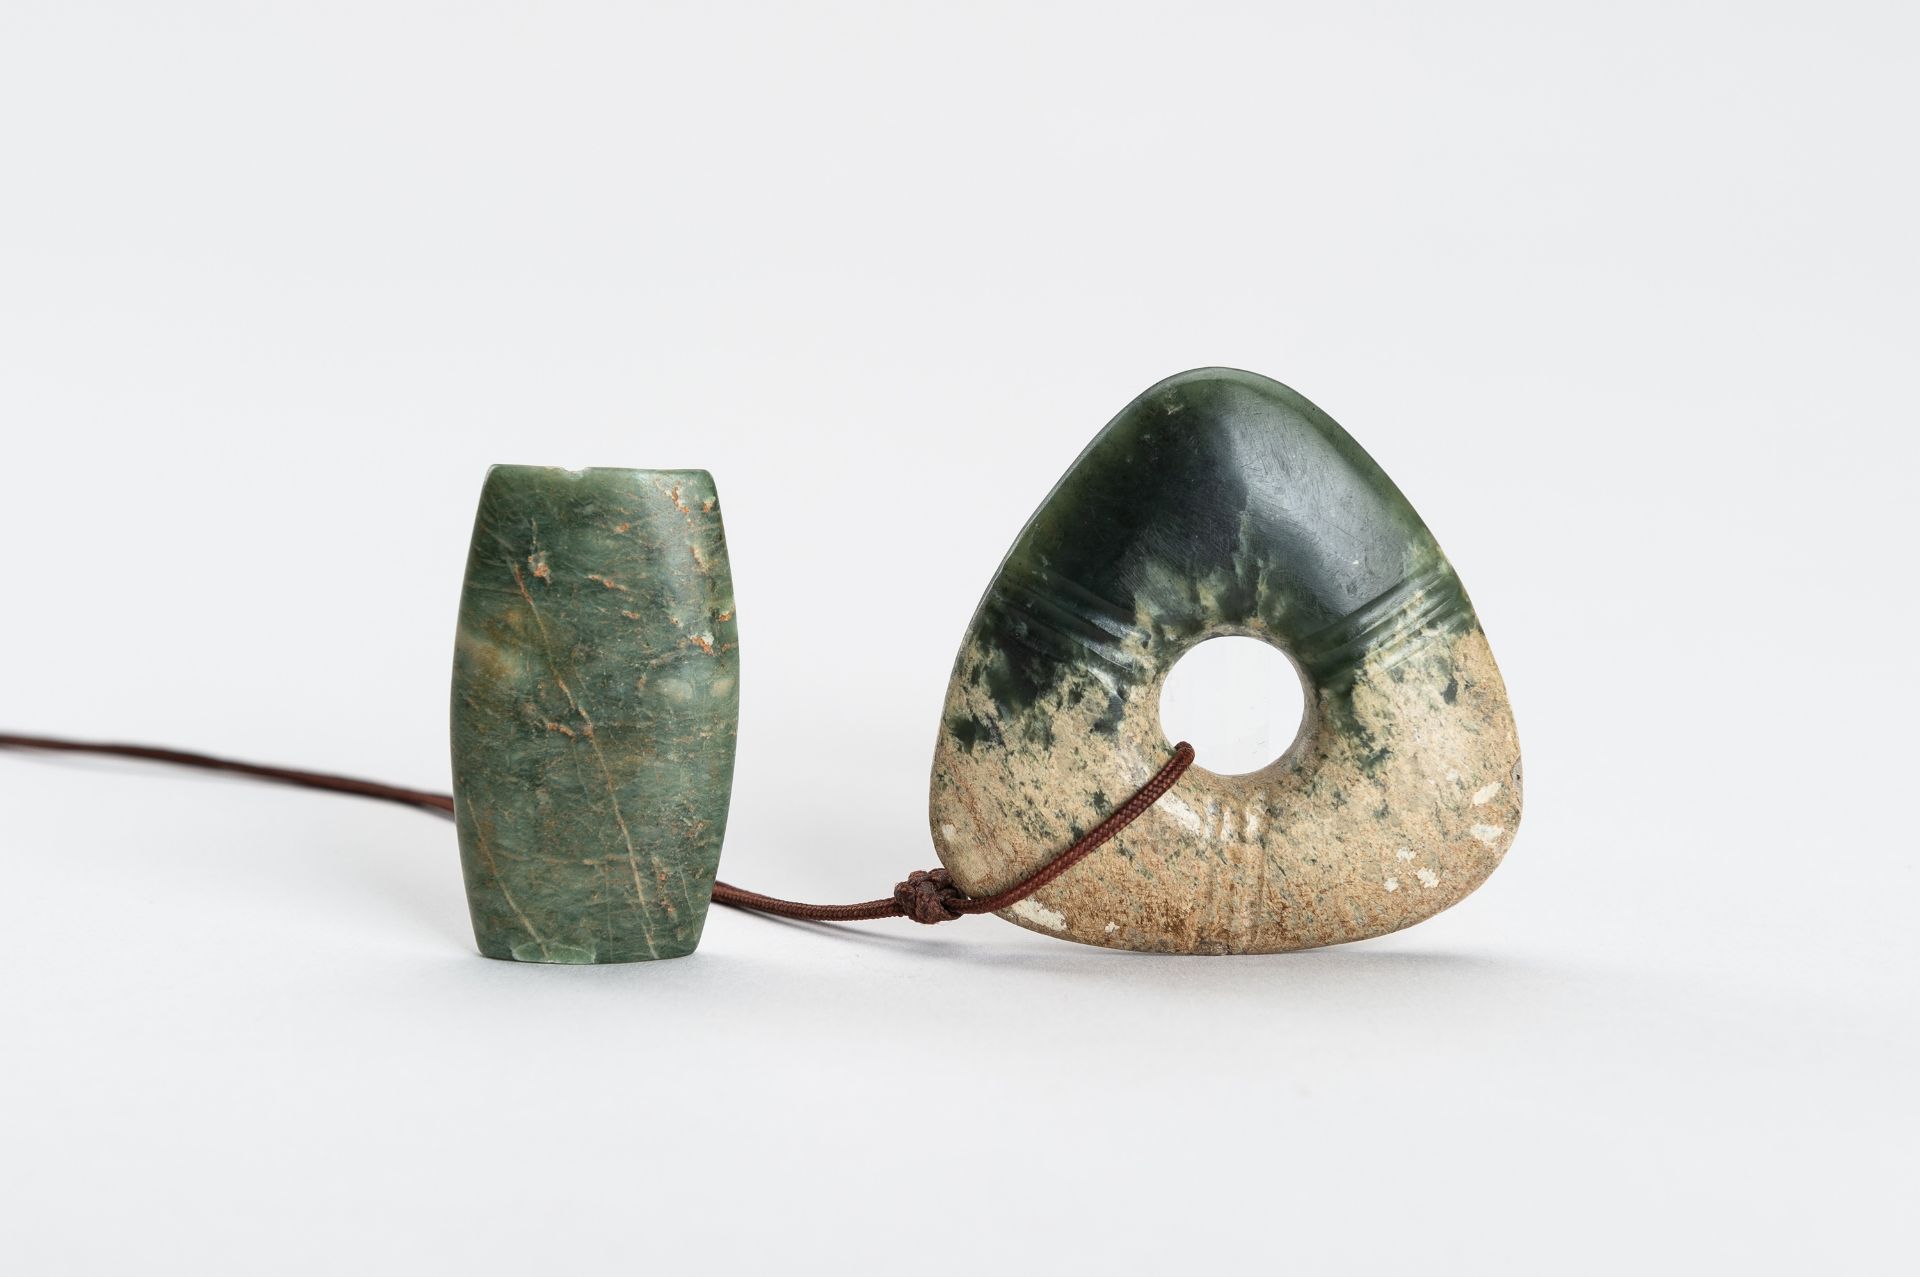 AN ARCHAISTIC LOT WITH A JADE AND A SERPENTINE PENDANT - Image 7 of 9